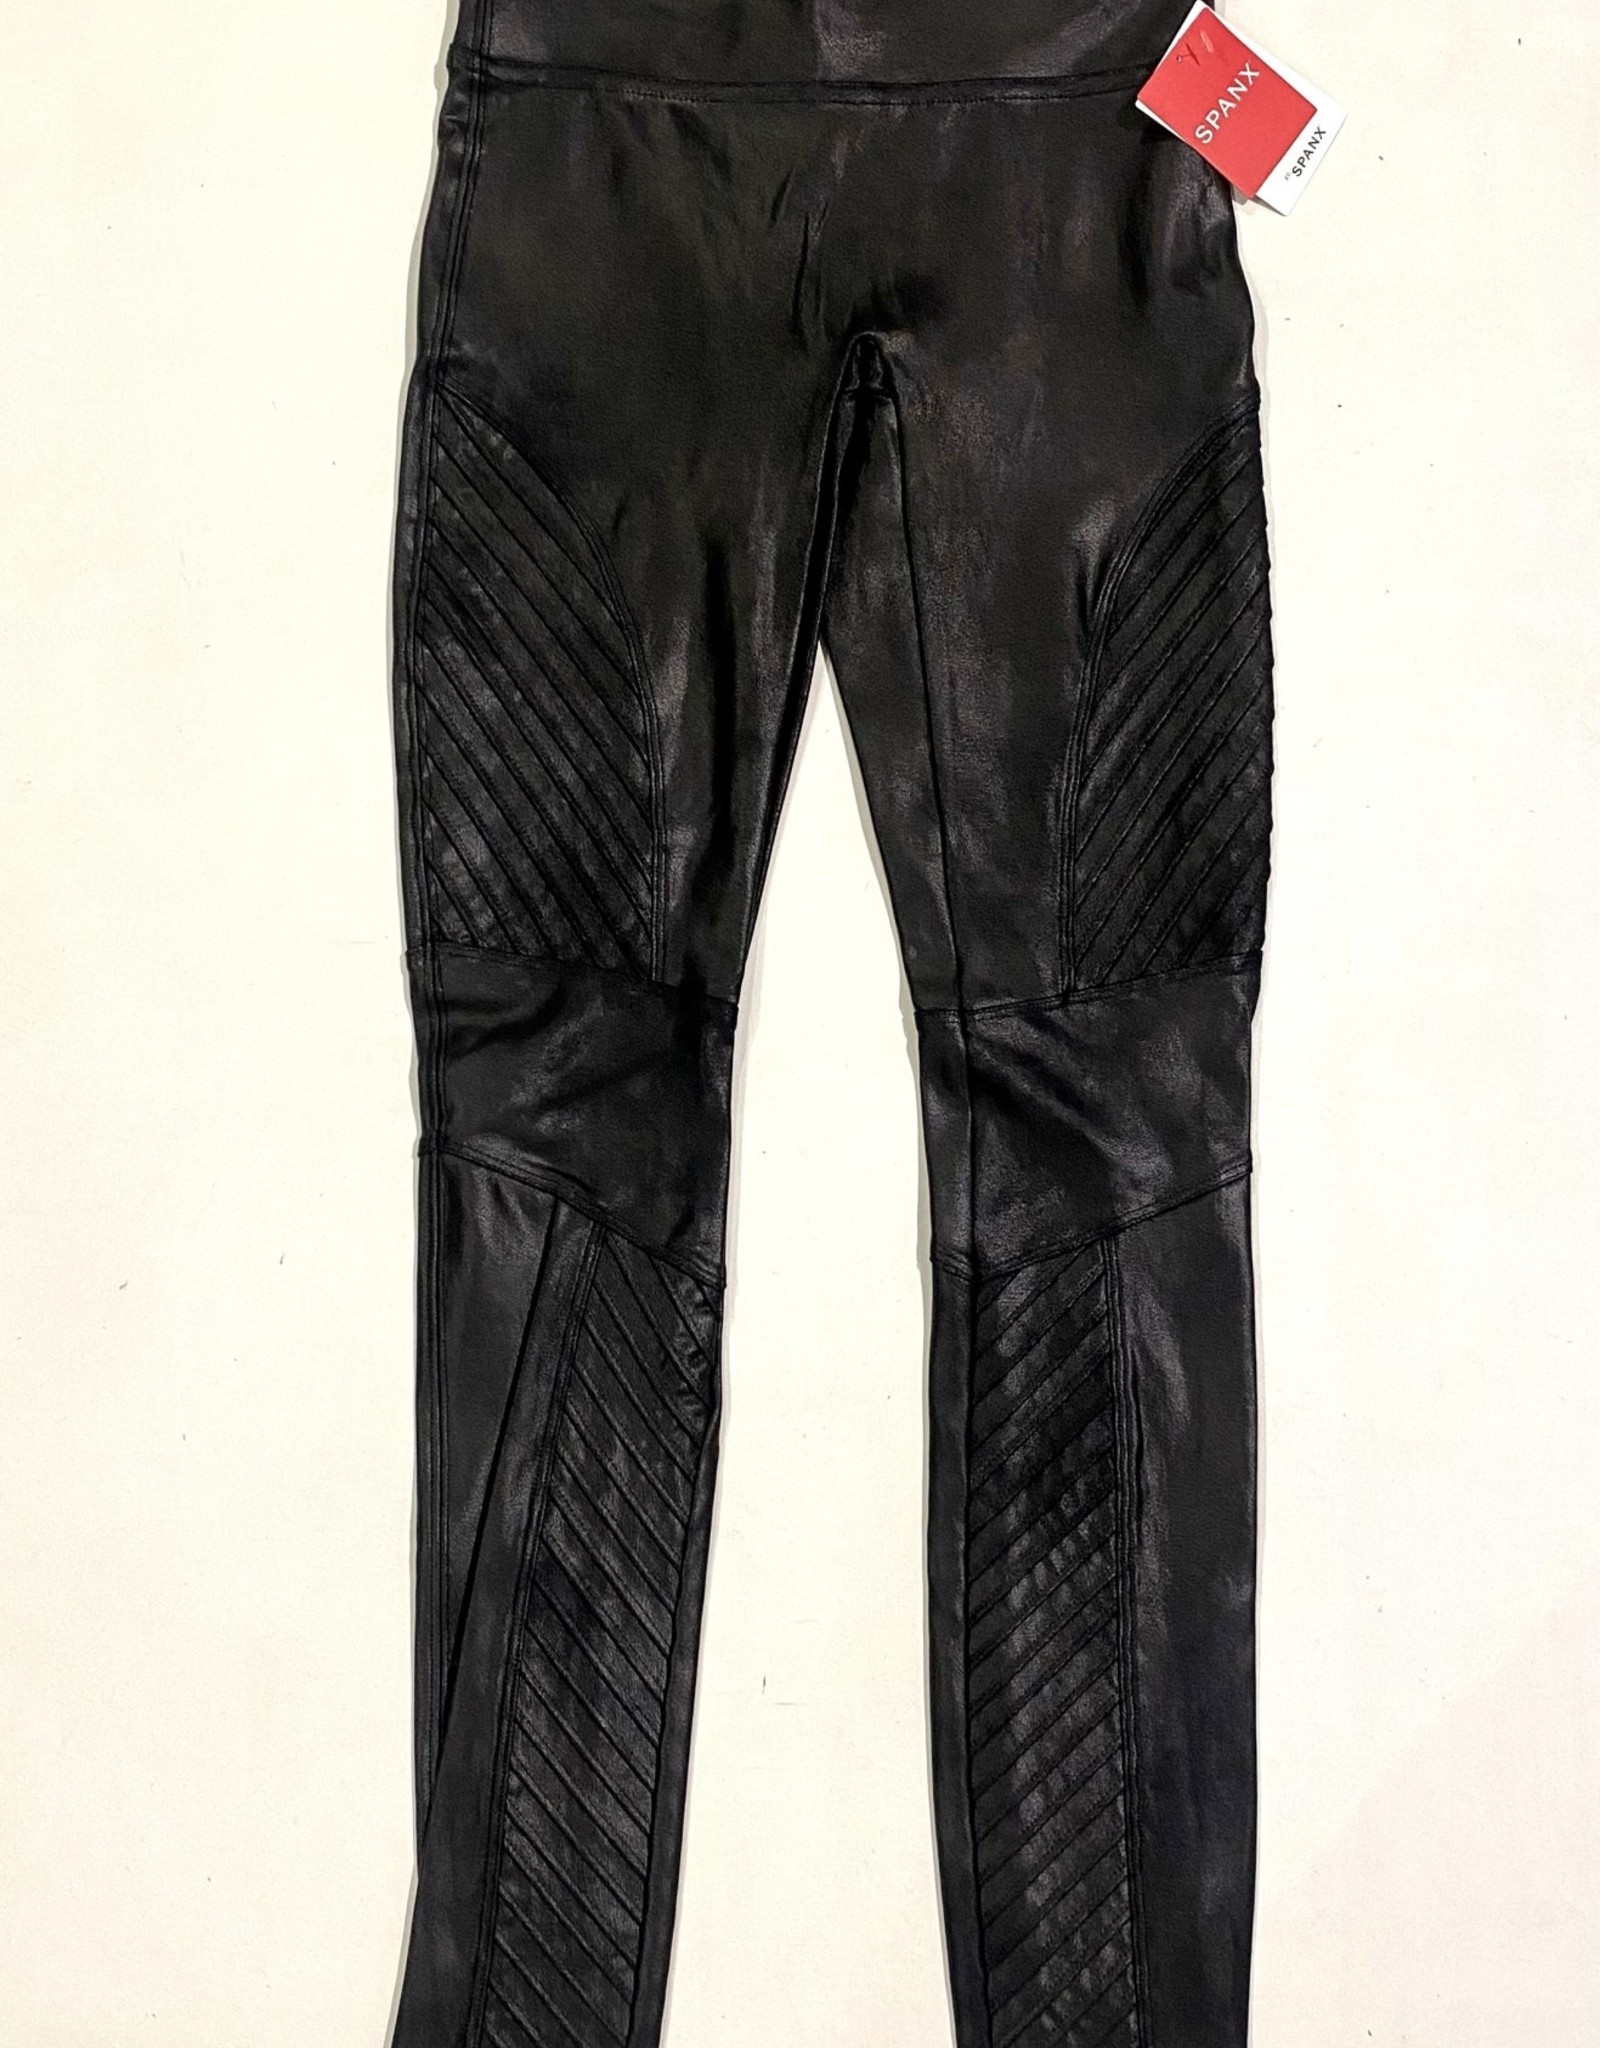 SPANX, Pants & Jumpsuits, Spanxfaux Leather Moto Leggings Sizesmall